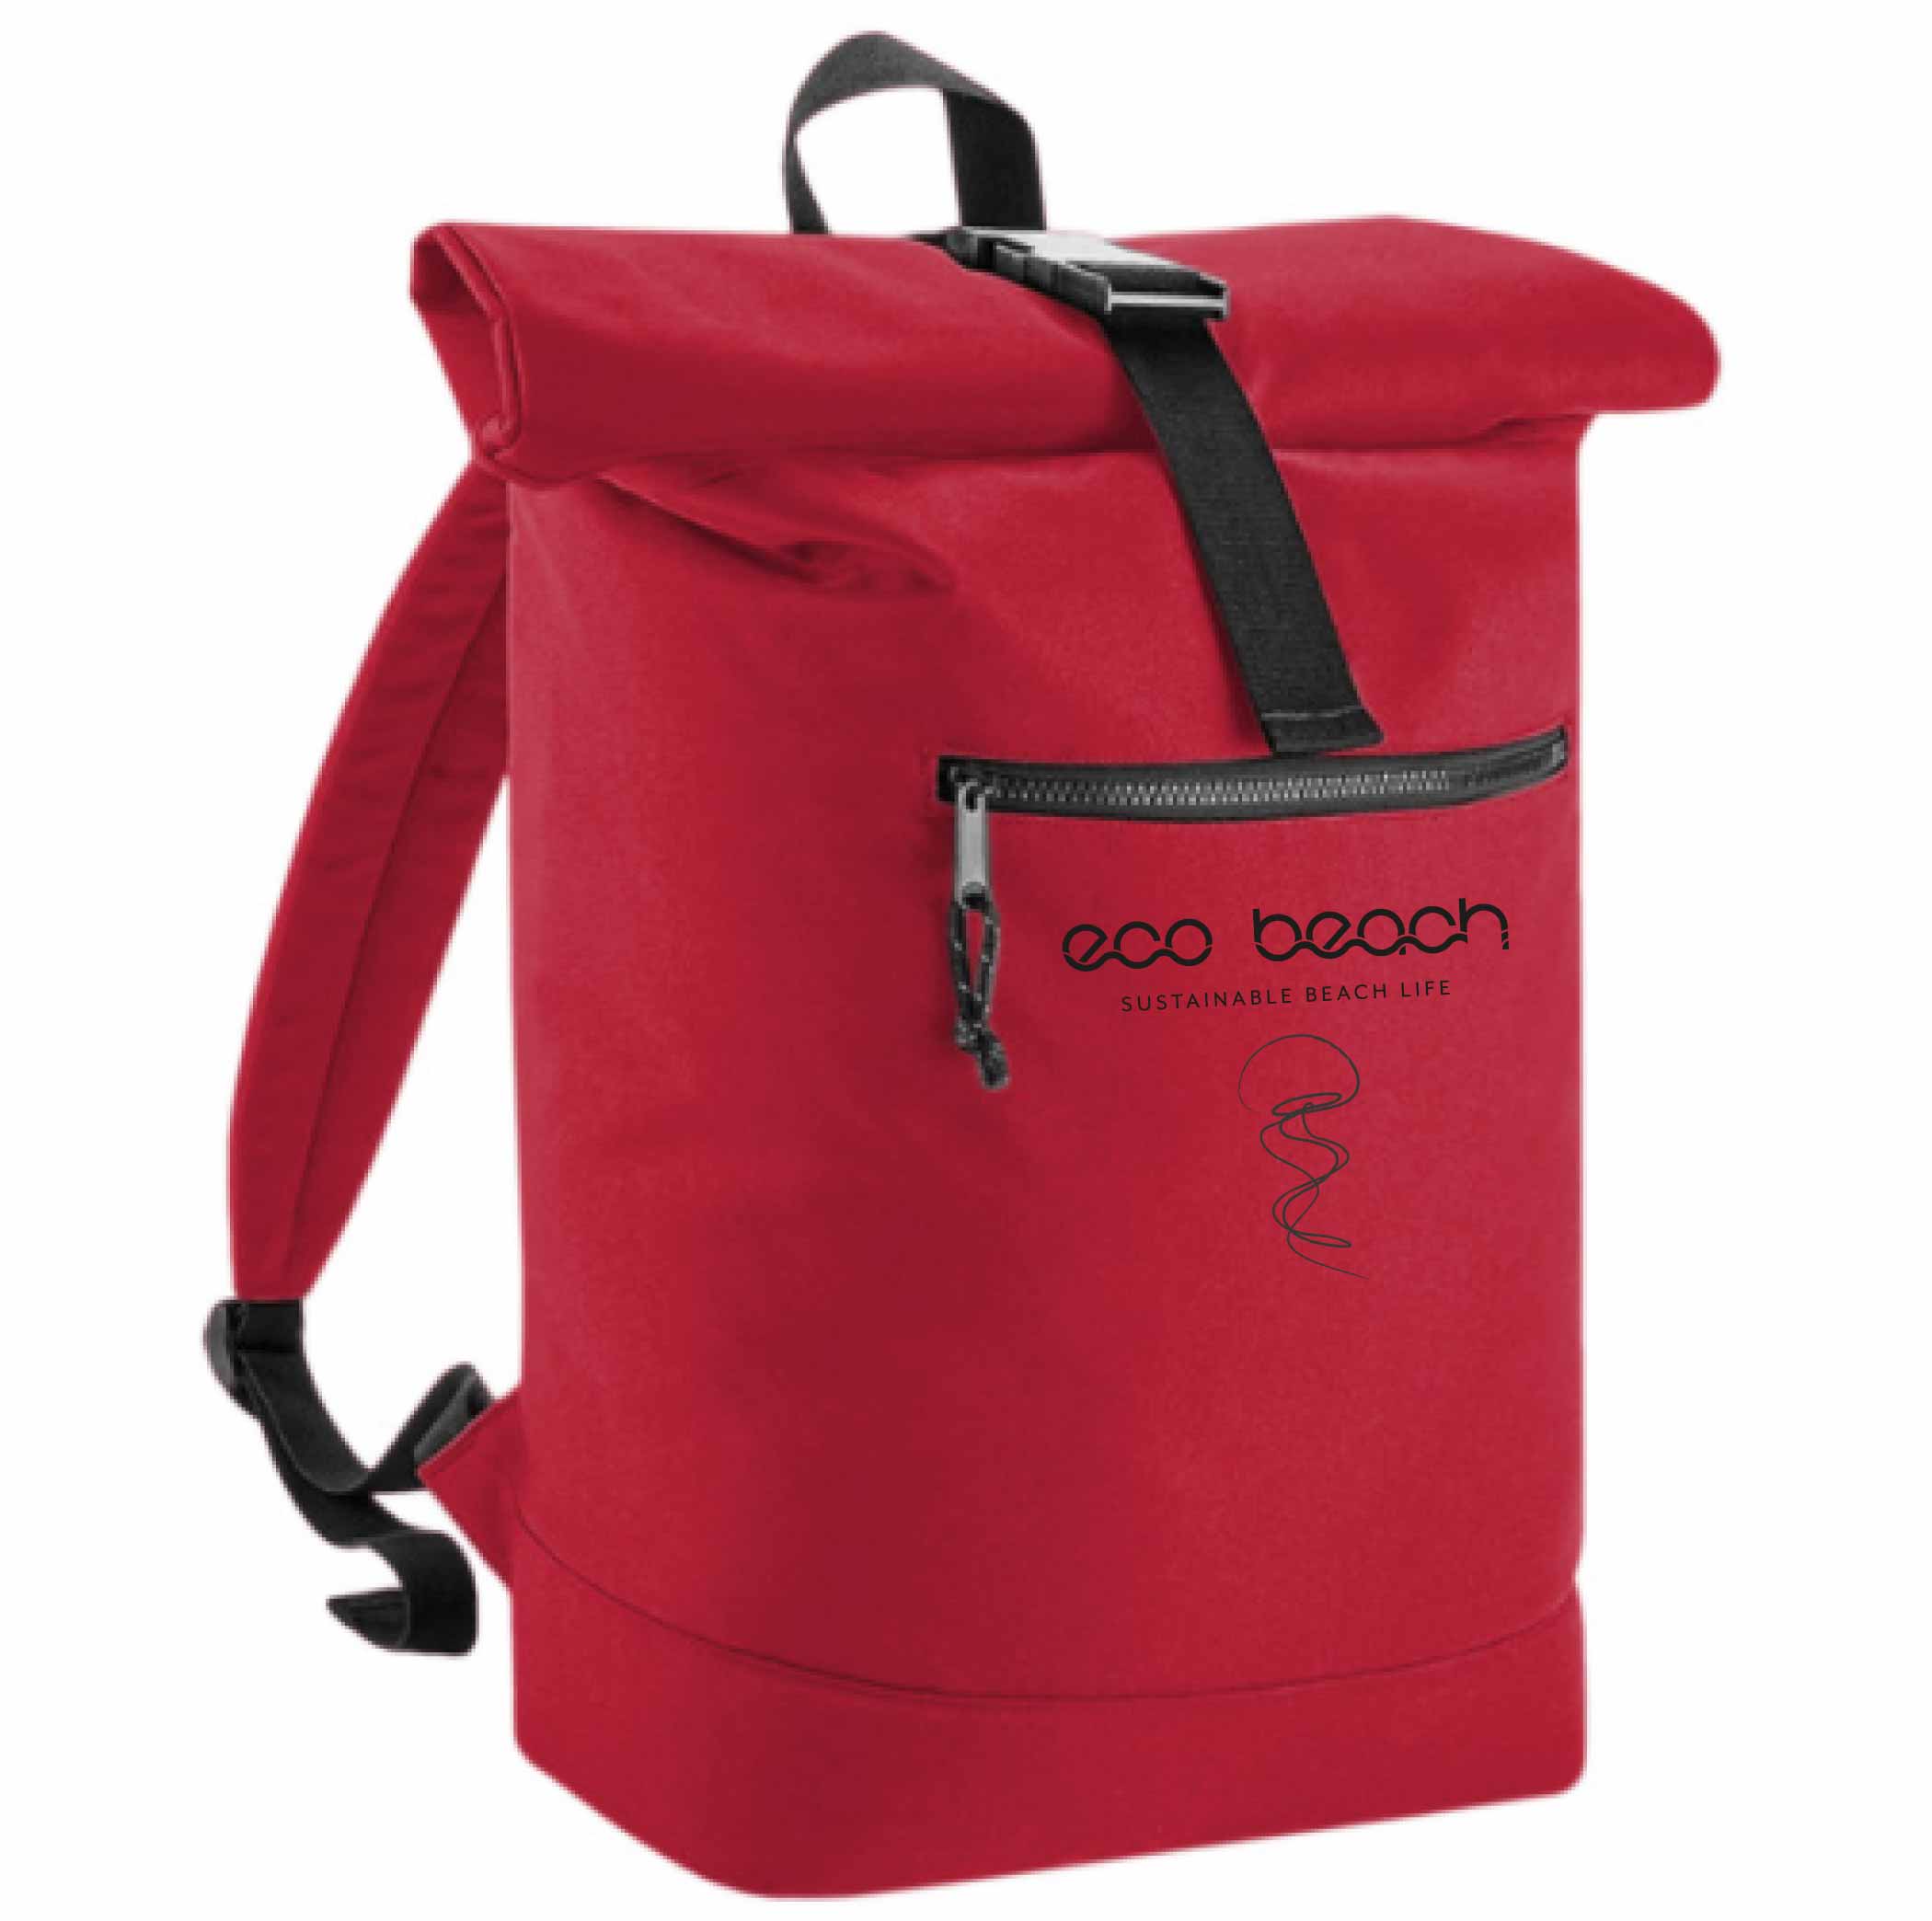 Recycled Roll-top Bag